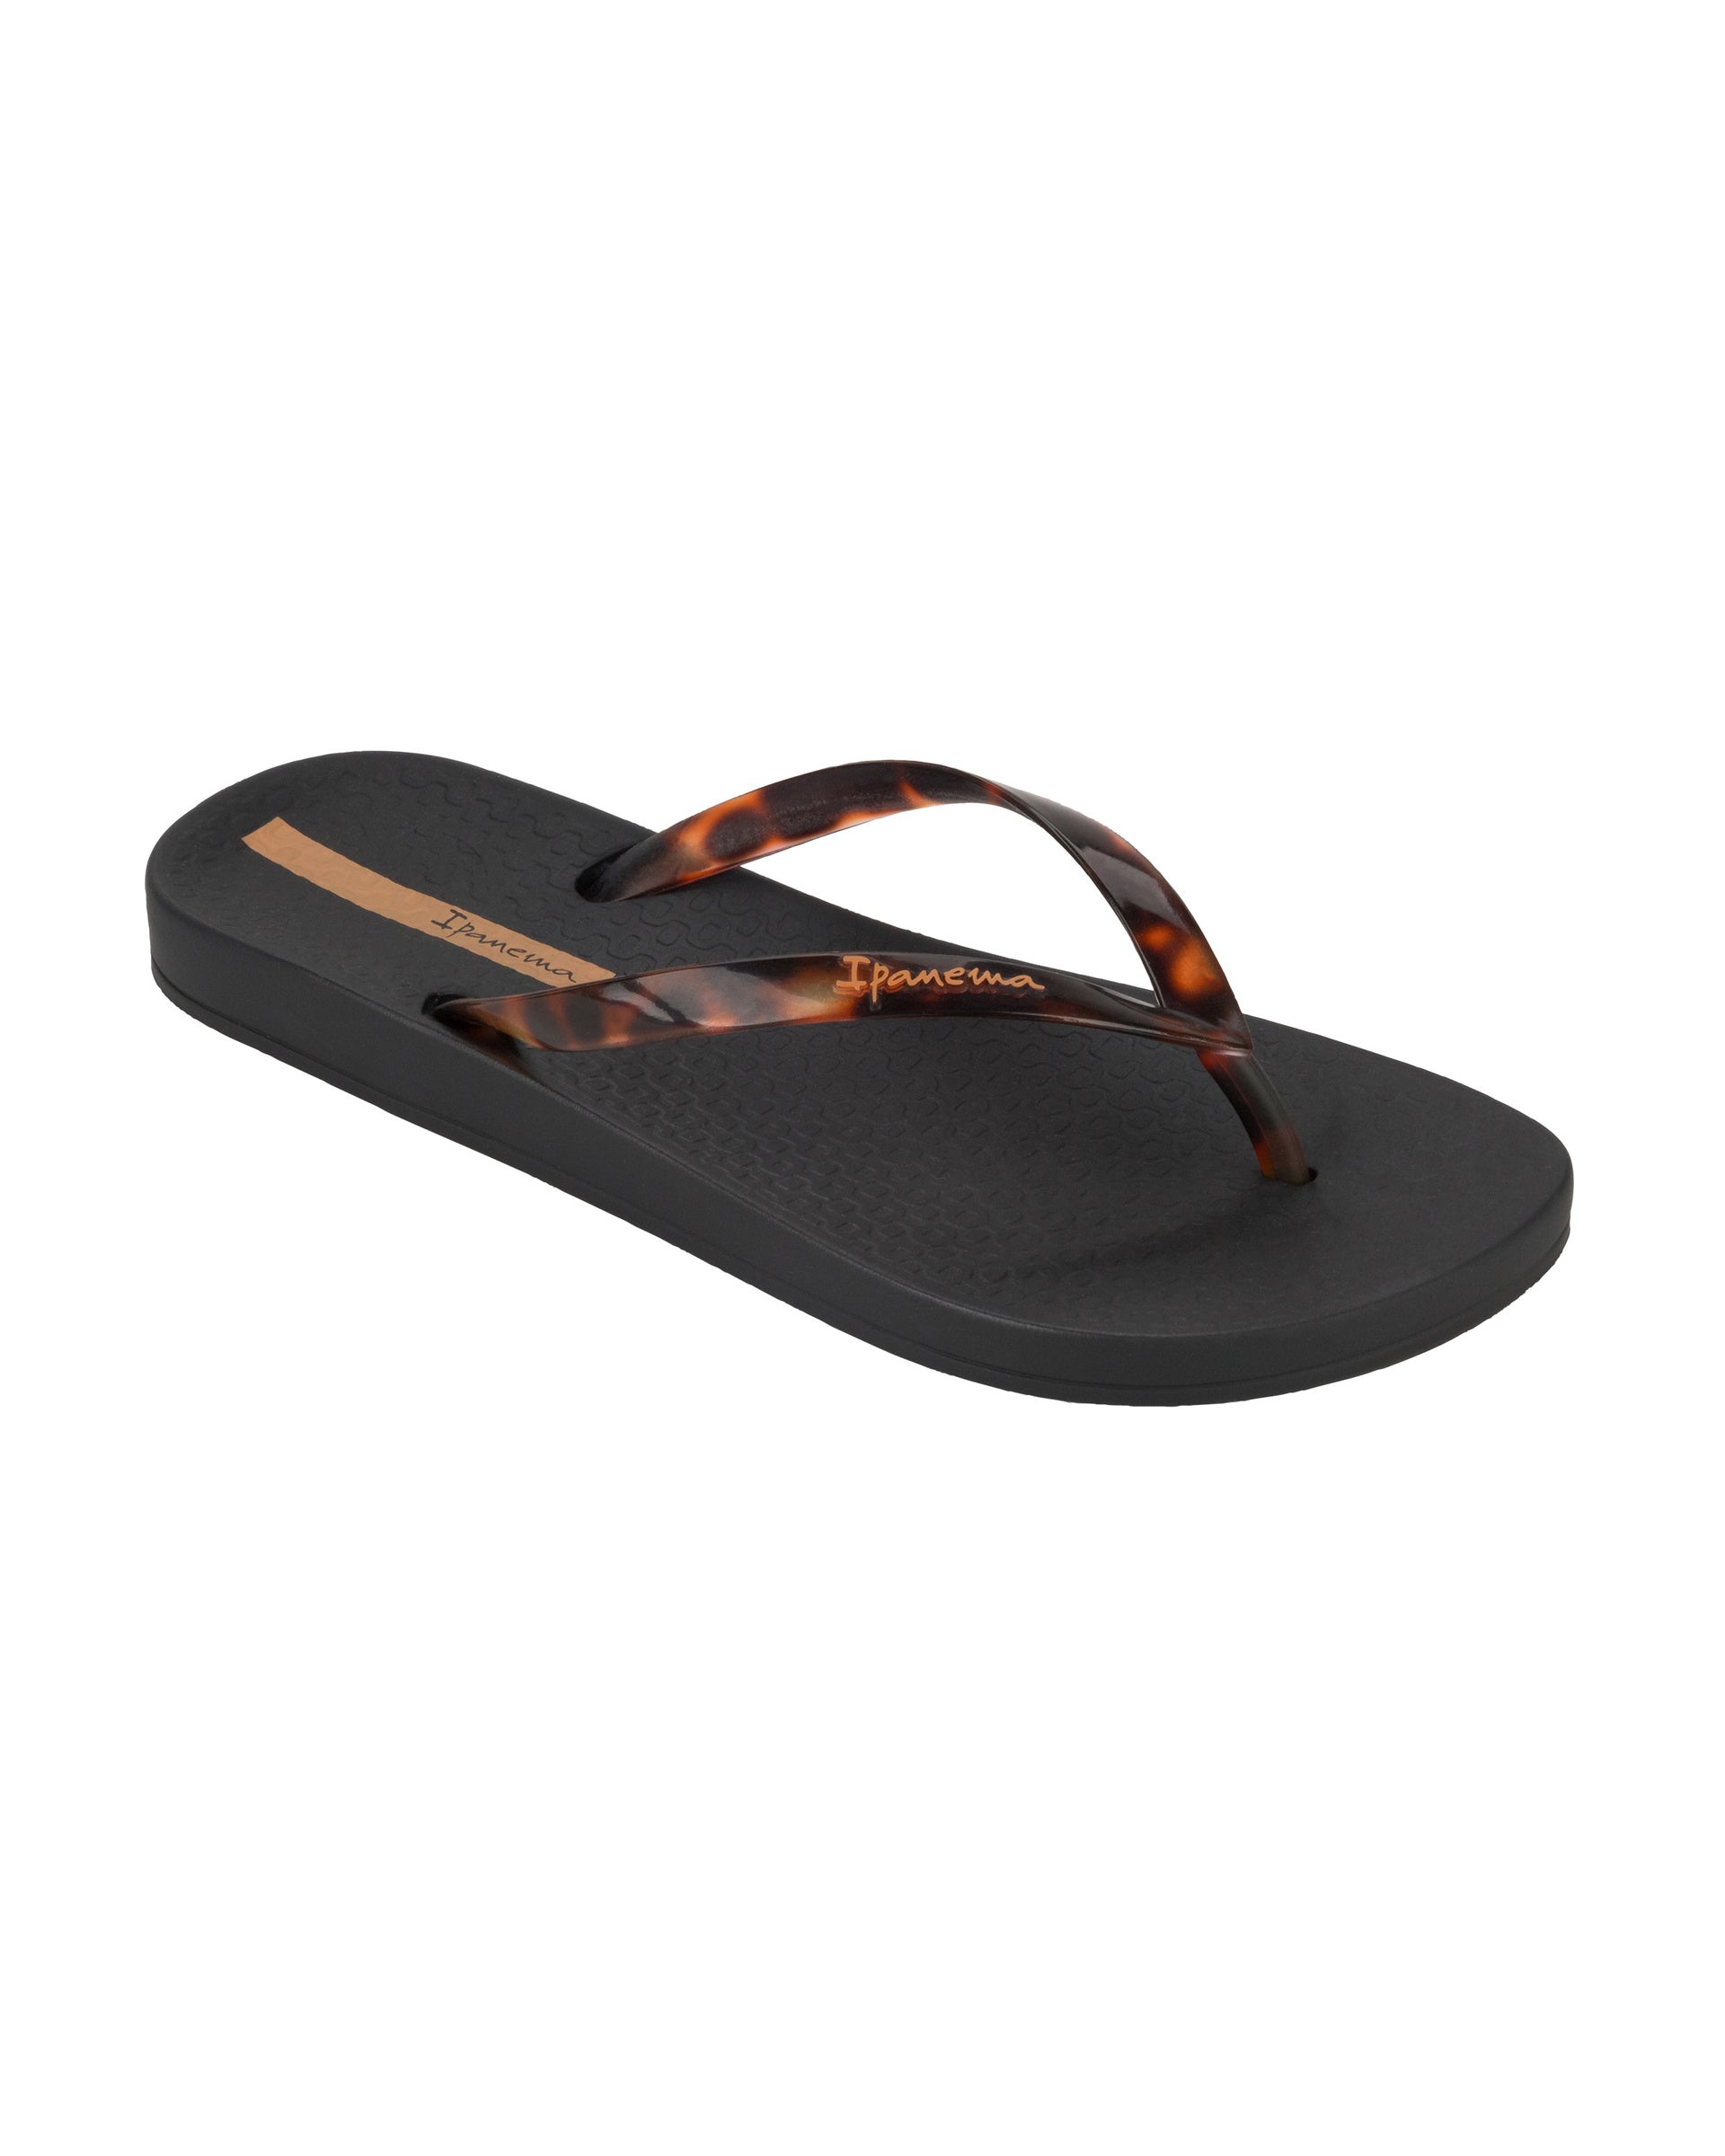 Angled view of a black Ipanema Ana Connect women's flip flop with brown tortoiseshell  color strap.